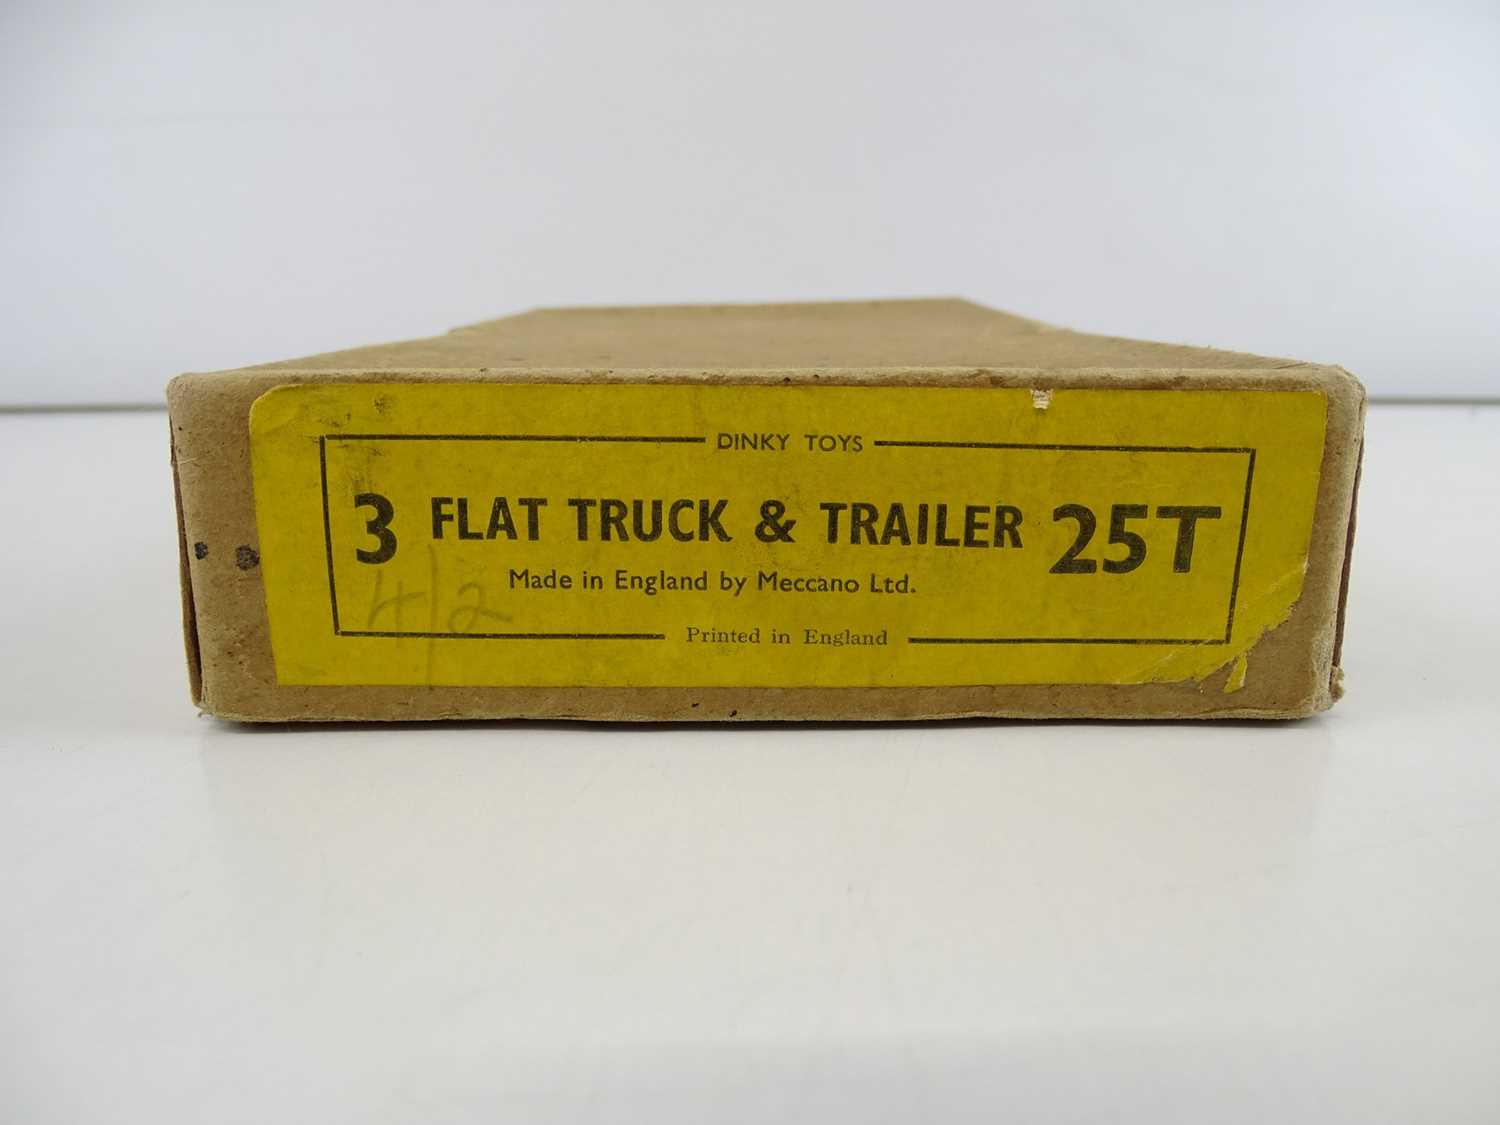 A DINKY 25T Flat Truck & Trailer trade box complete with 3 examples of the model, 2 in green, 1 in - Image 3 of 9